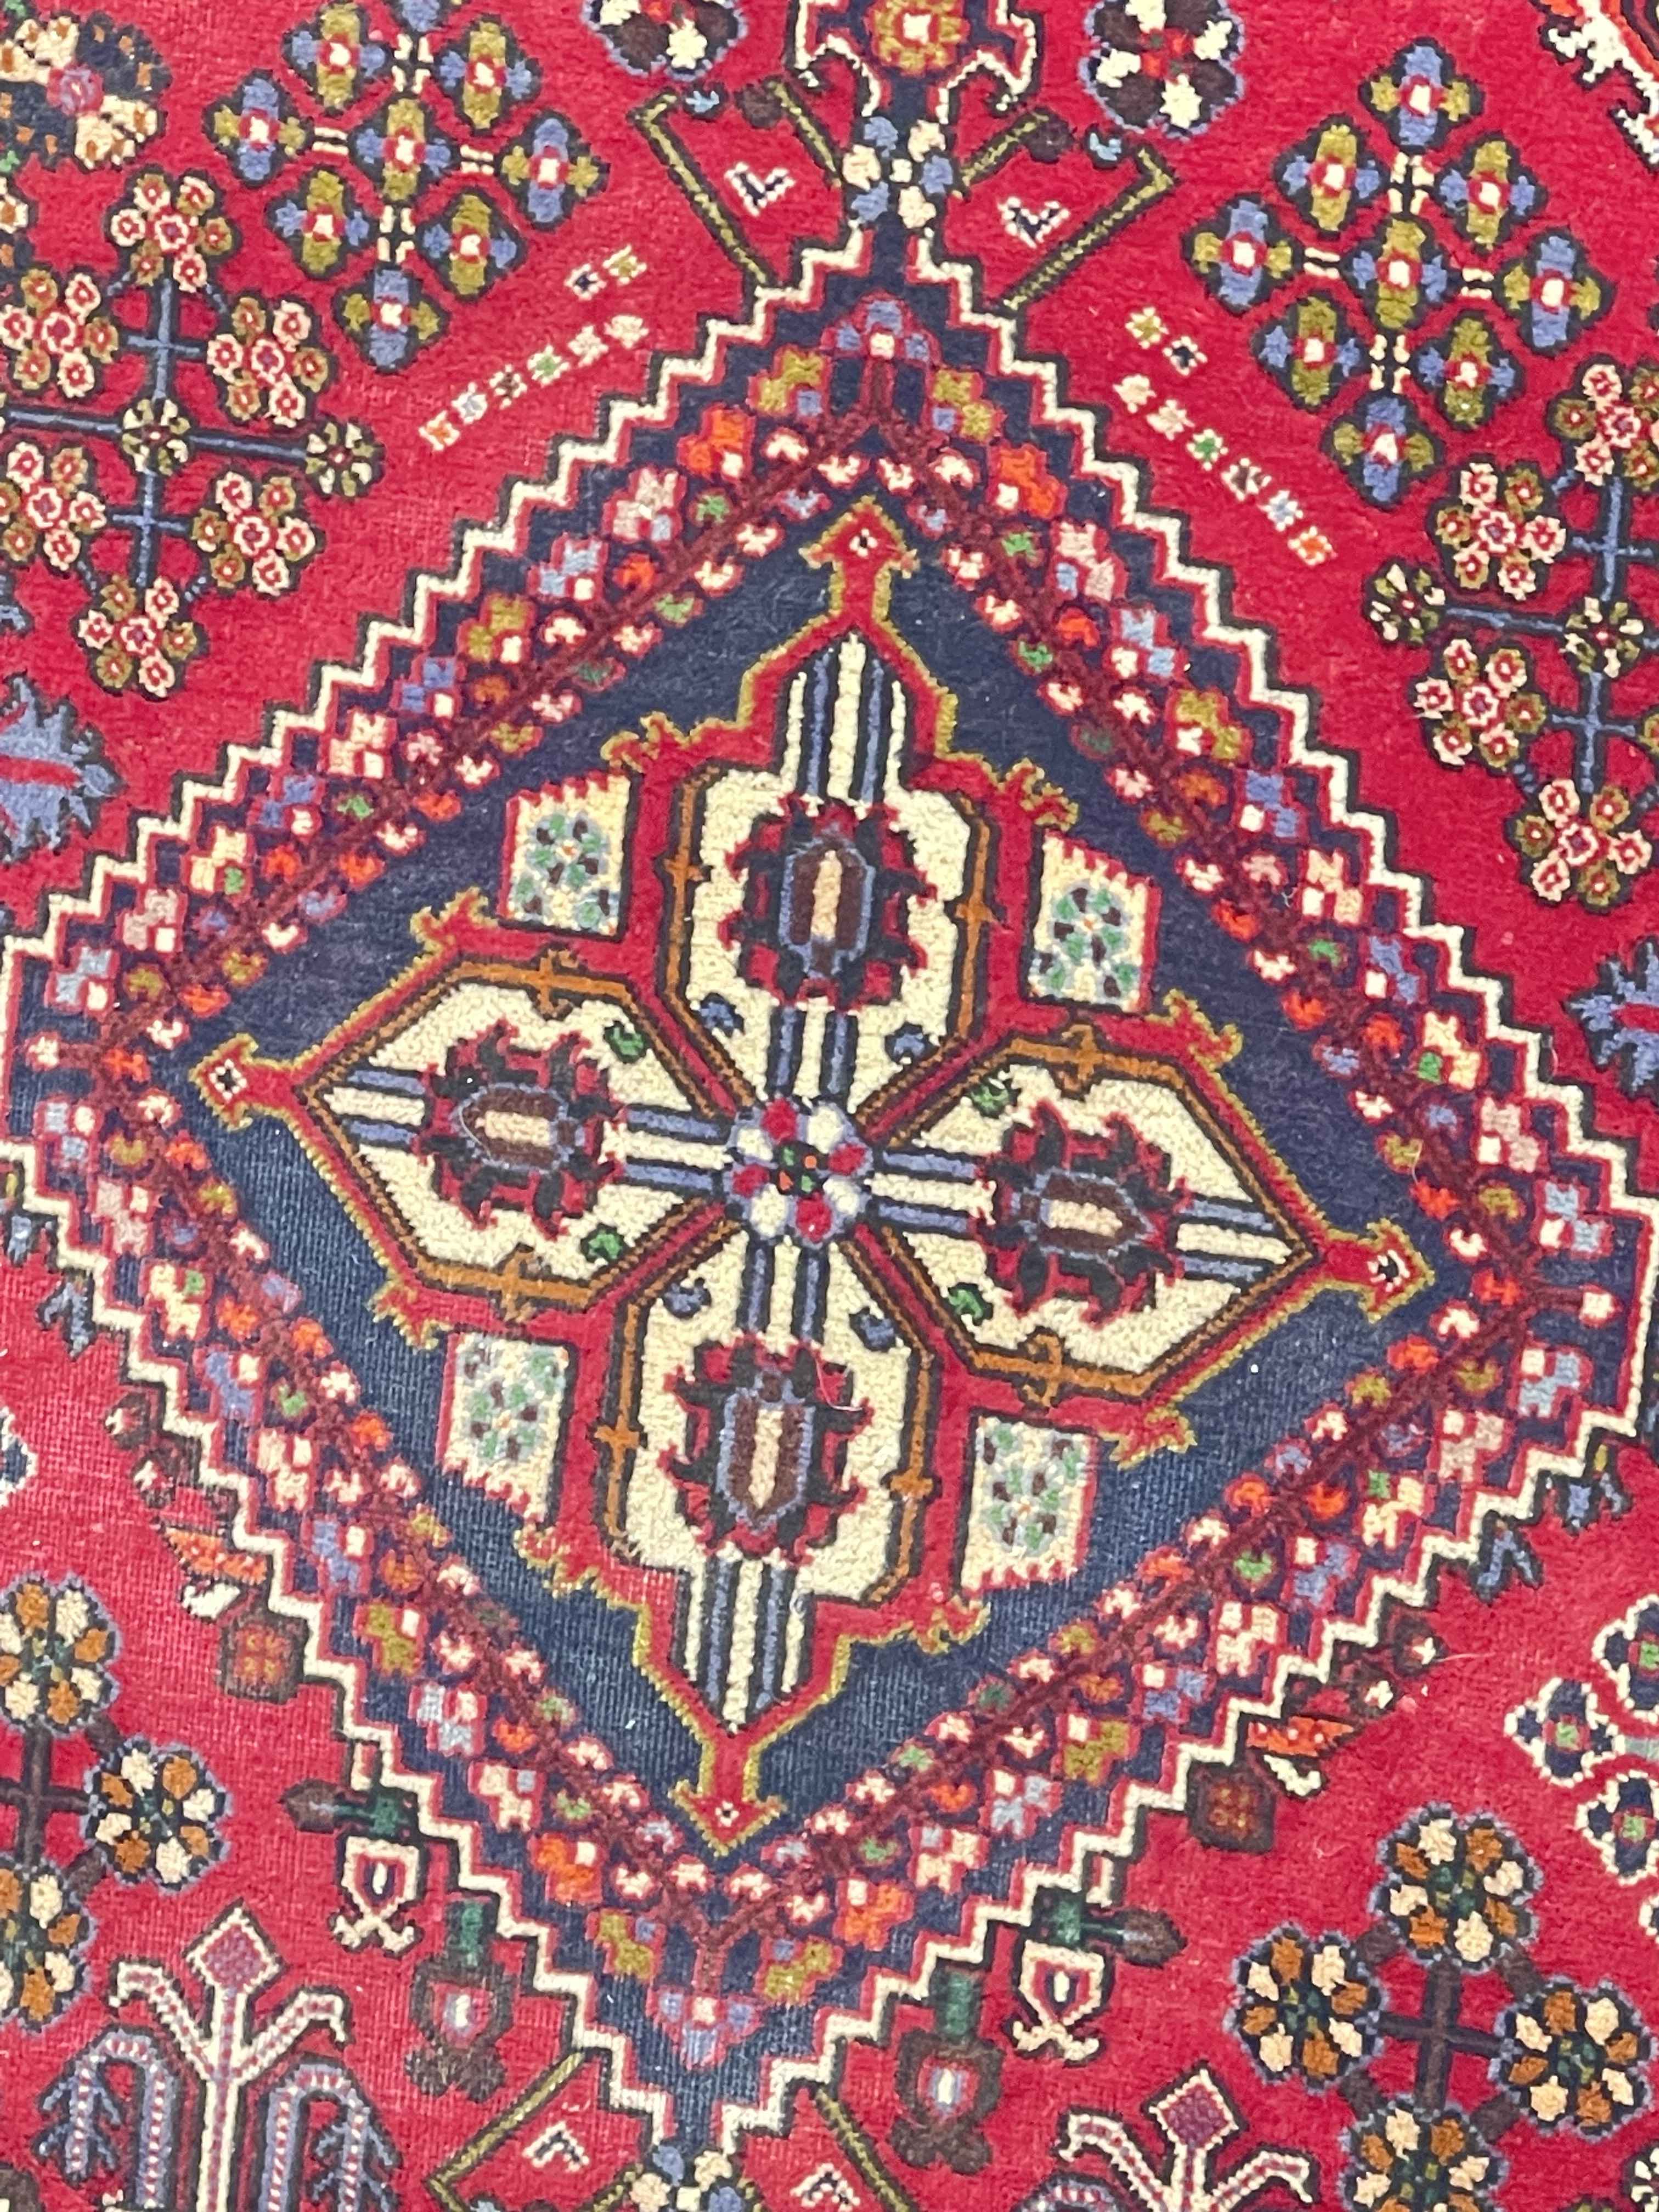 Hand knotted Persian Abadeh carpet runner 3.73 by 1.05. - Image 2 of 2